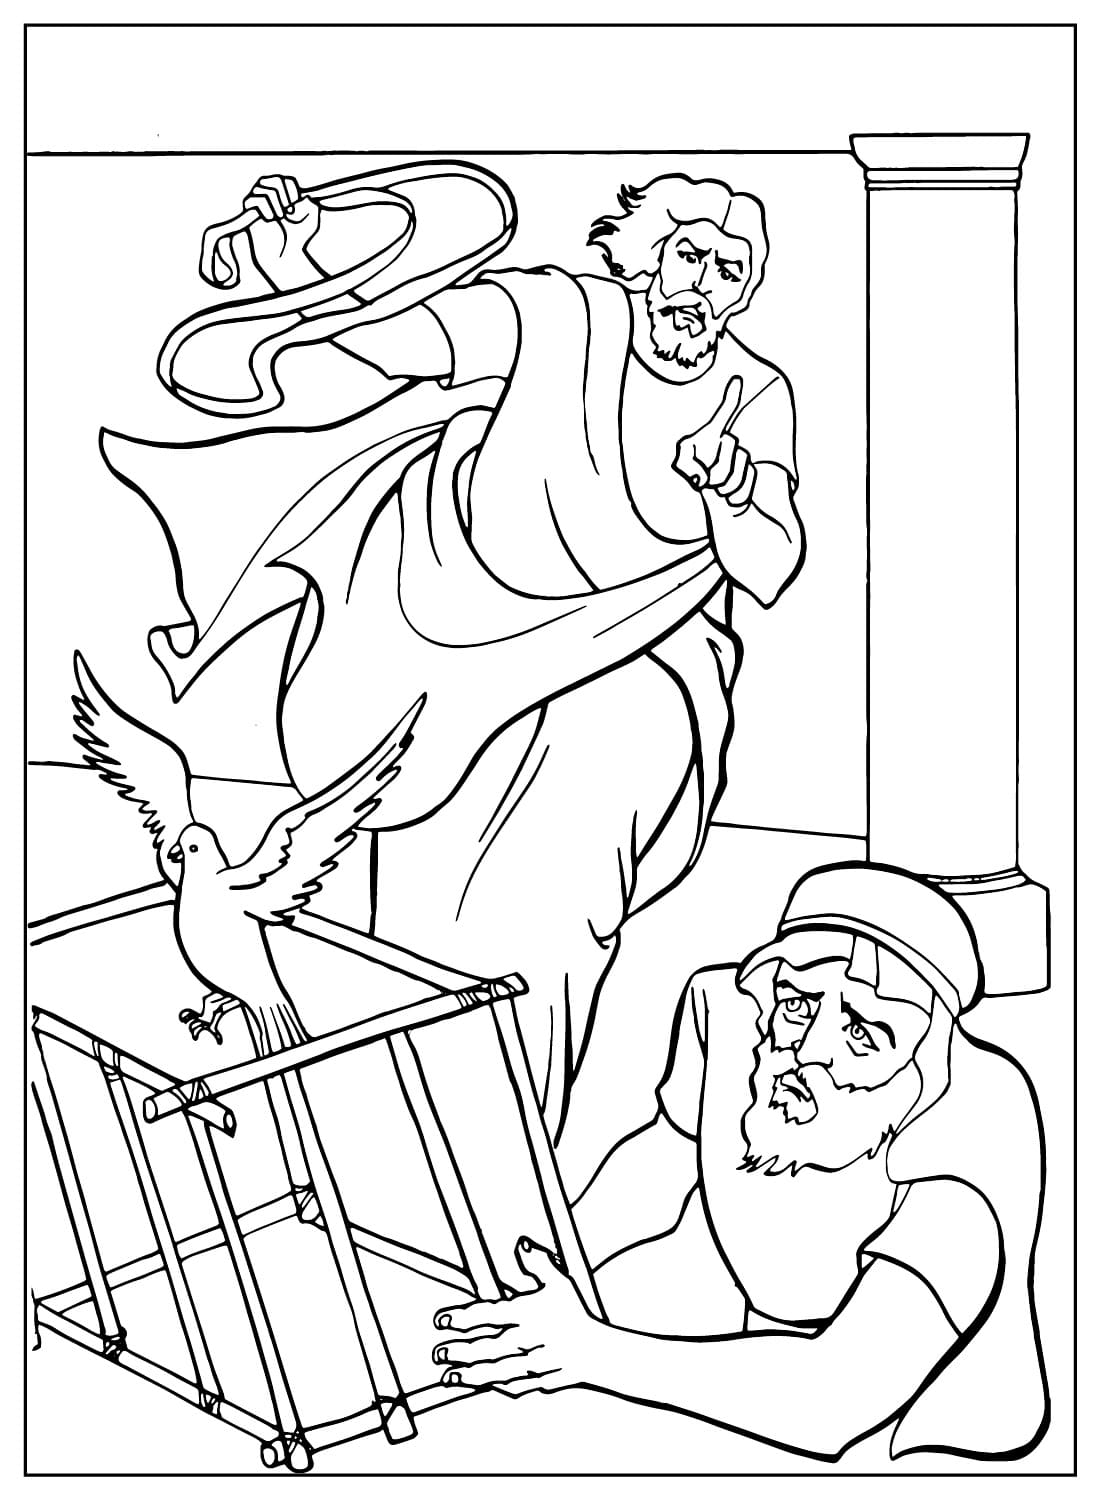 Jesus Cleansing the Temple Coloring Page from Jesus